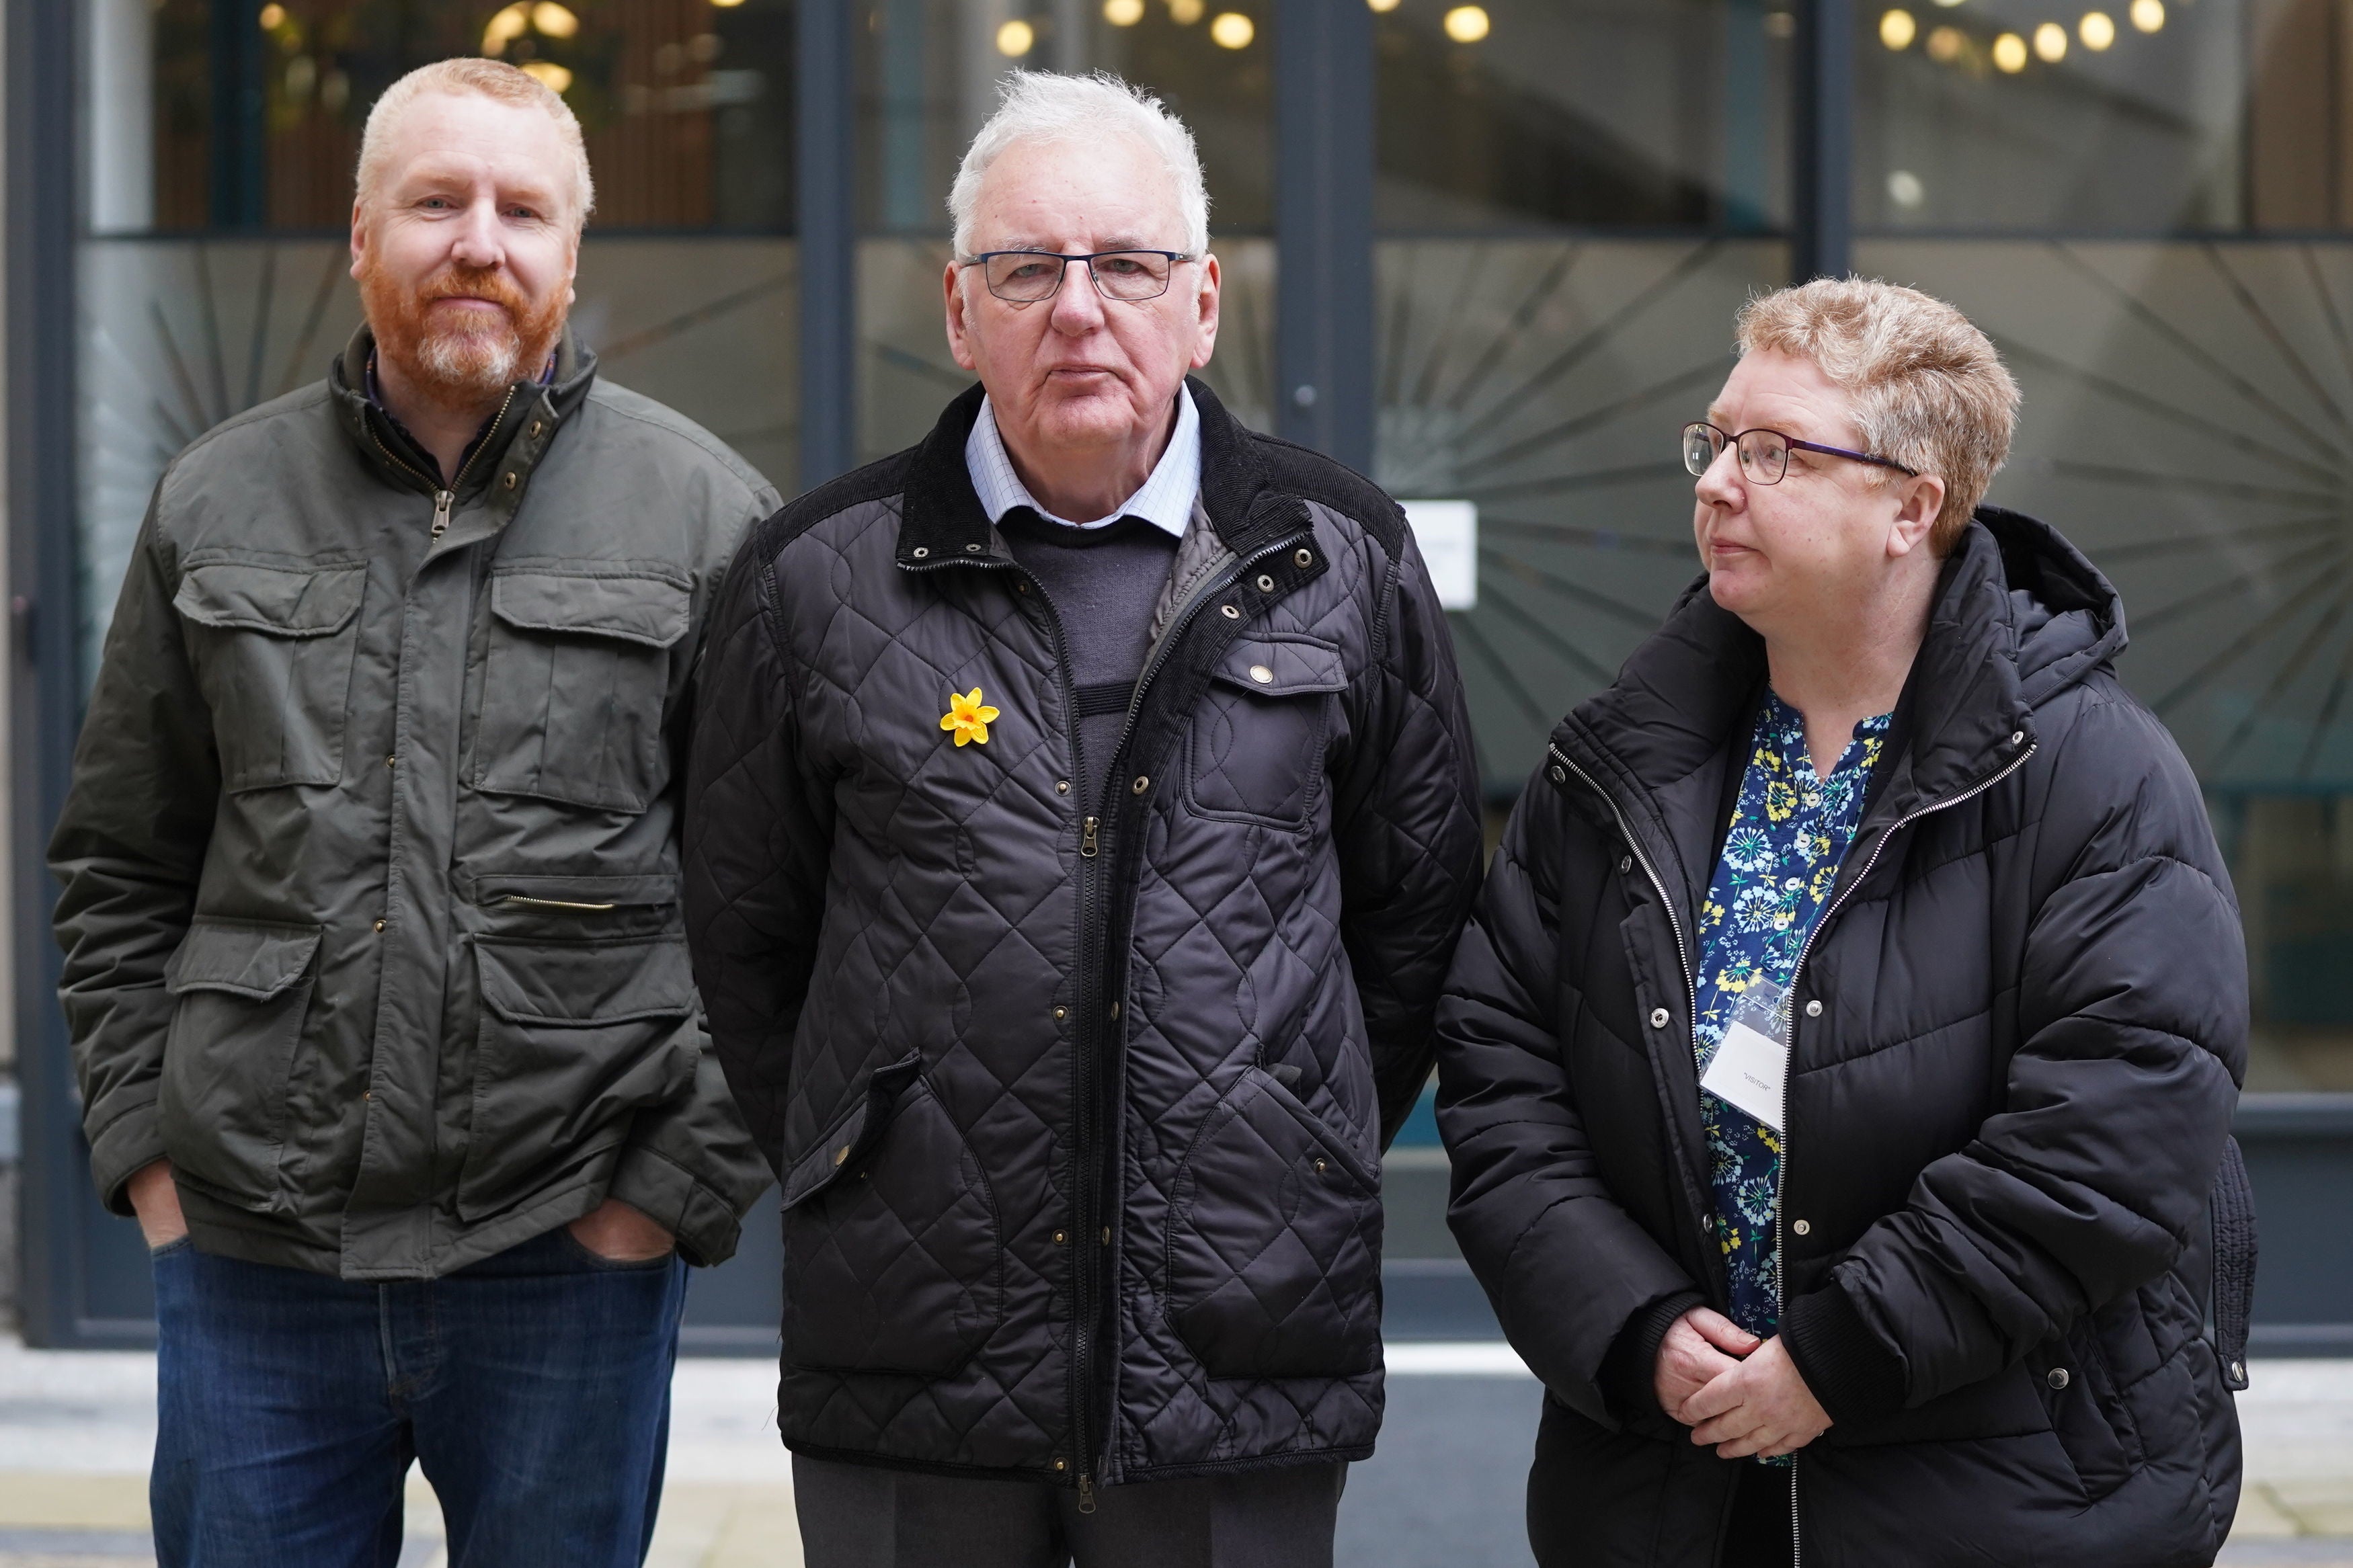 Noel Thomas (centre), who was wrongly jailed for theft, with son Edwin and daughter Sian, arrives at the International Dispute Resolution Centre in London for the Post Office Horizon IT inquiry.